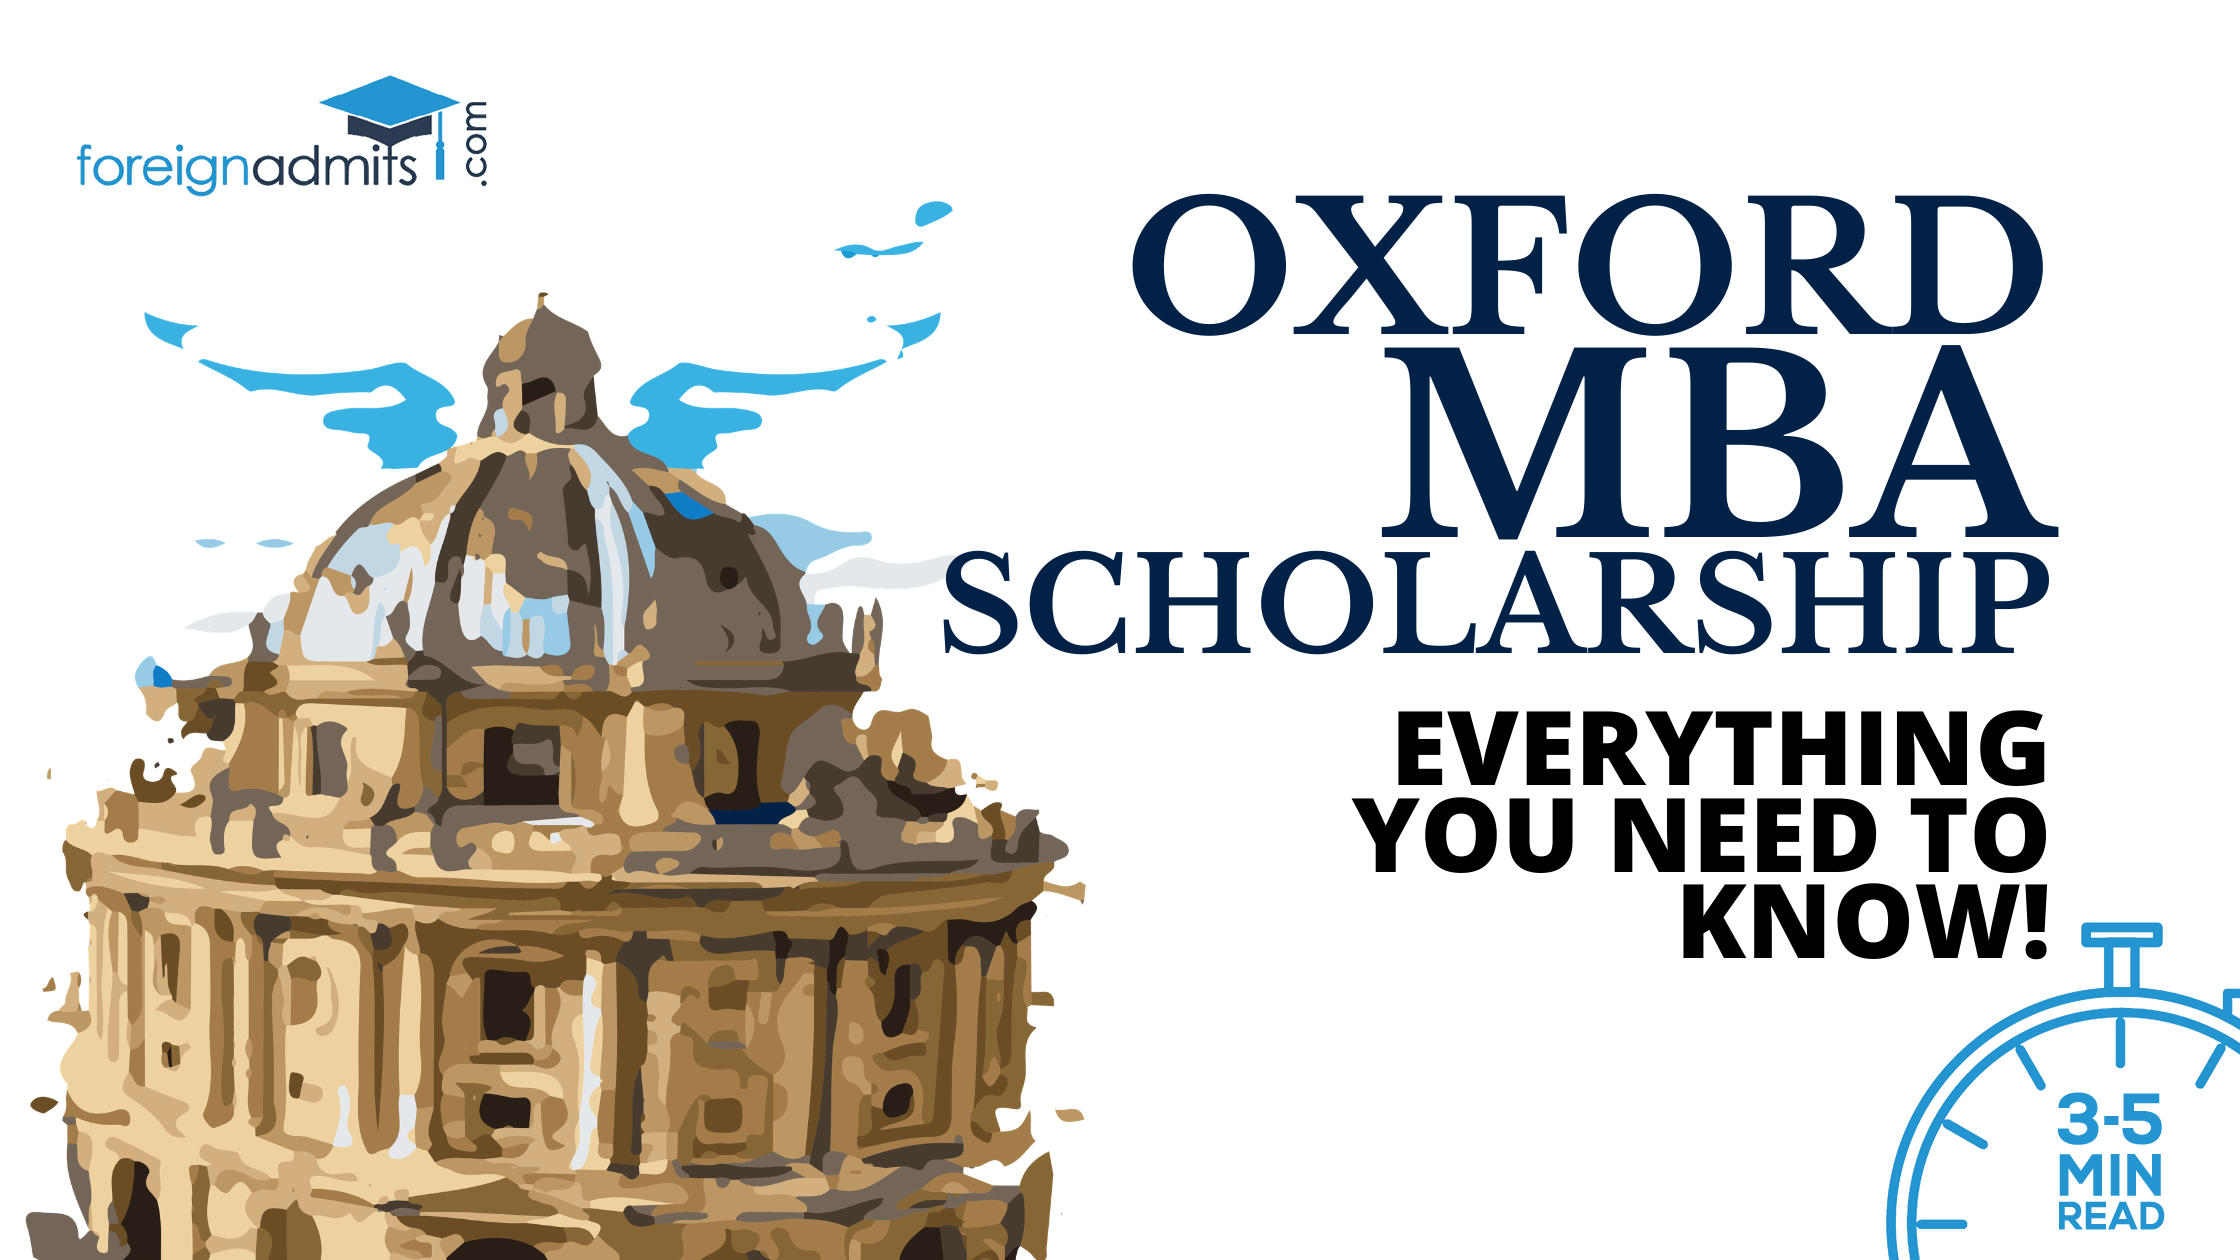 Everything You Need to Know about Oxford MBA Scholarship